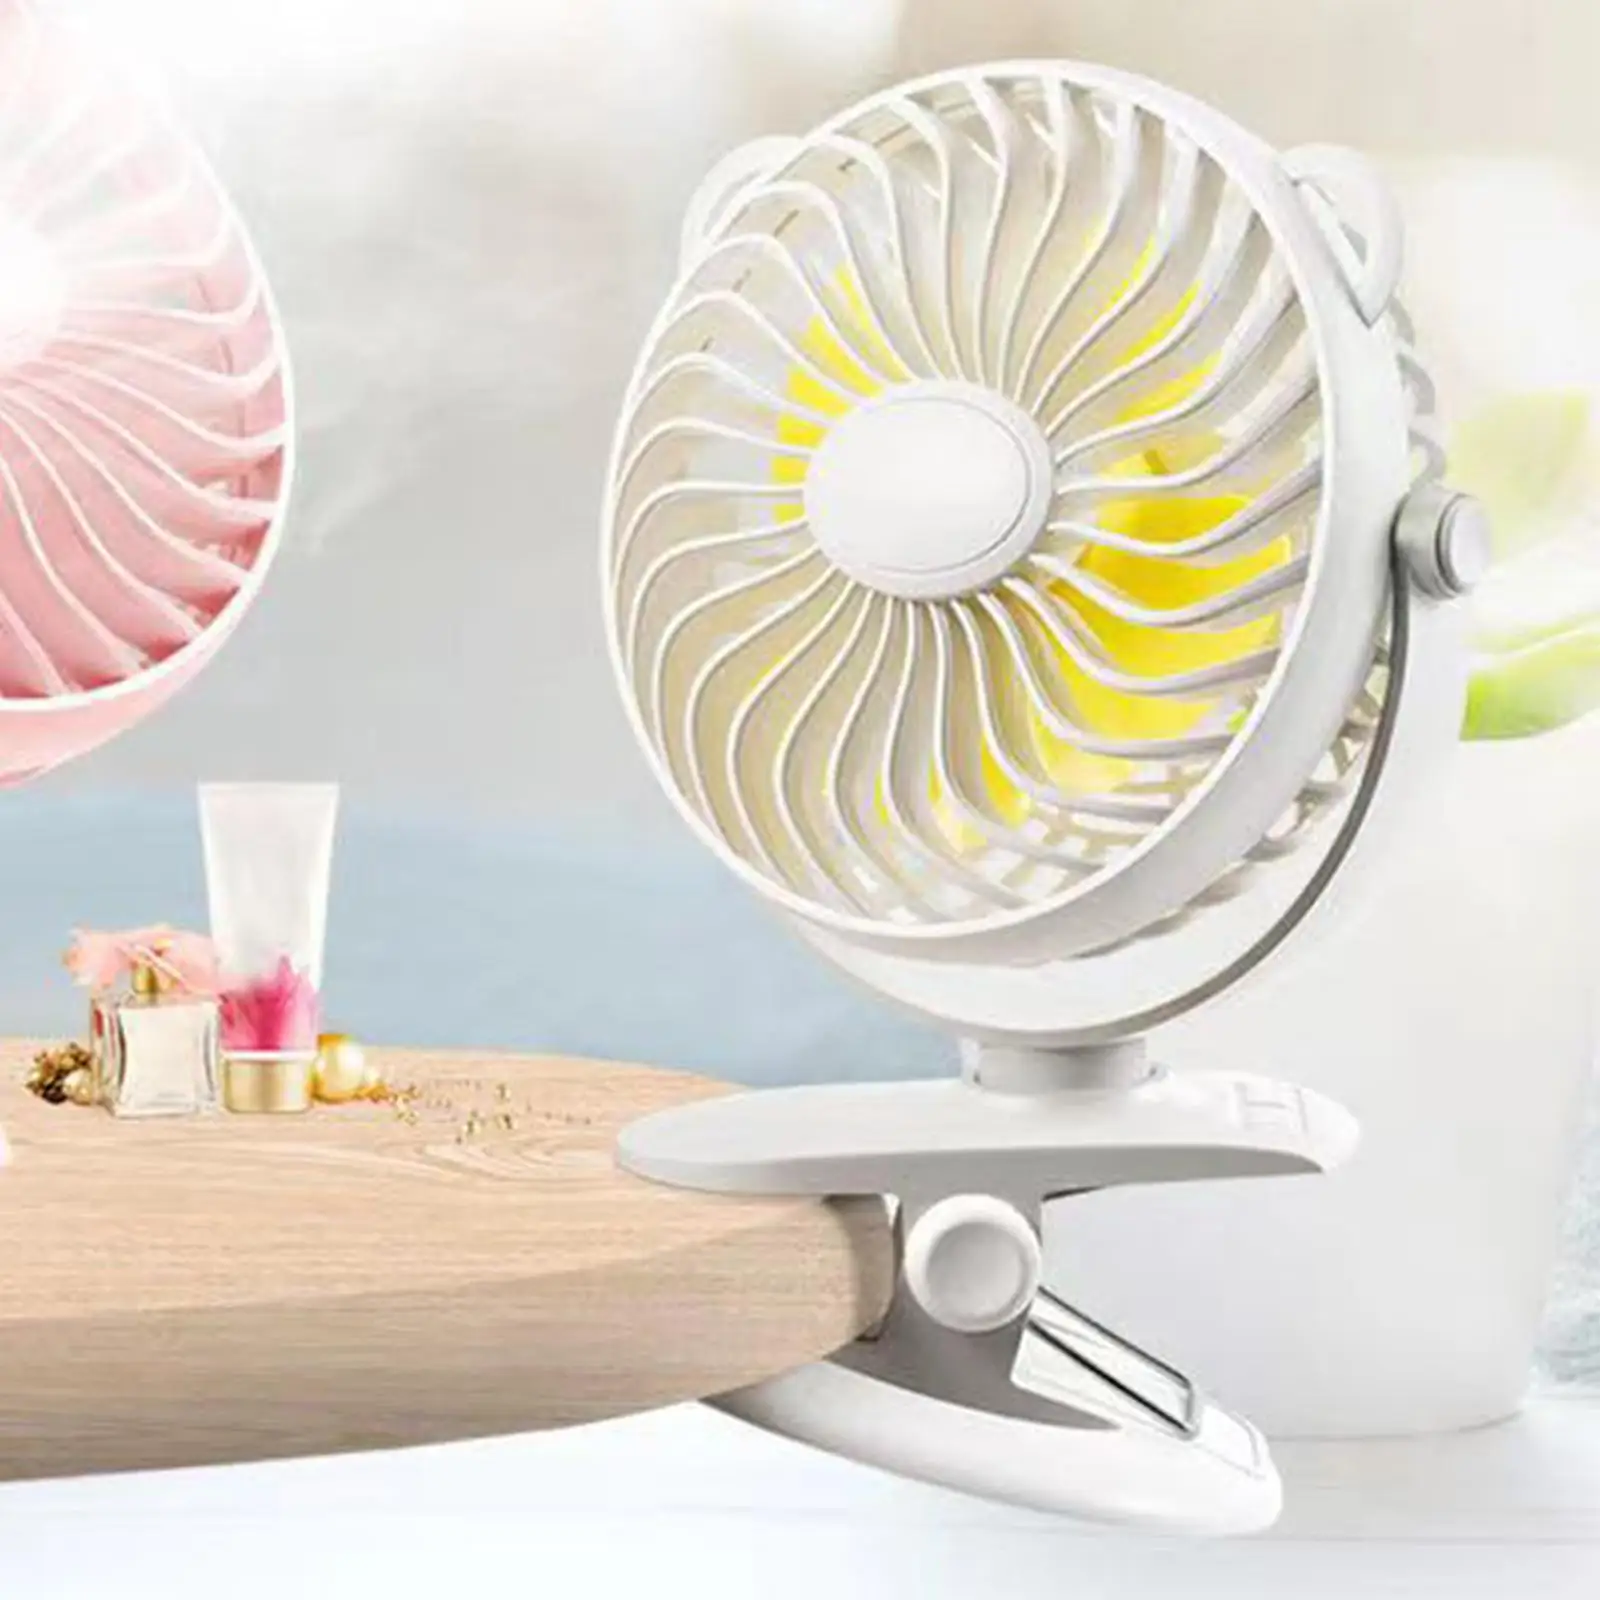 USB Mini Fan Clip On Portable 3 Speeds Personal for Desk Camping Table